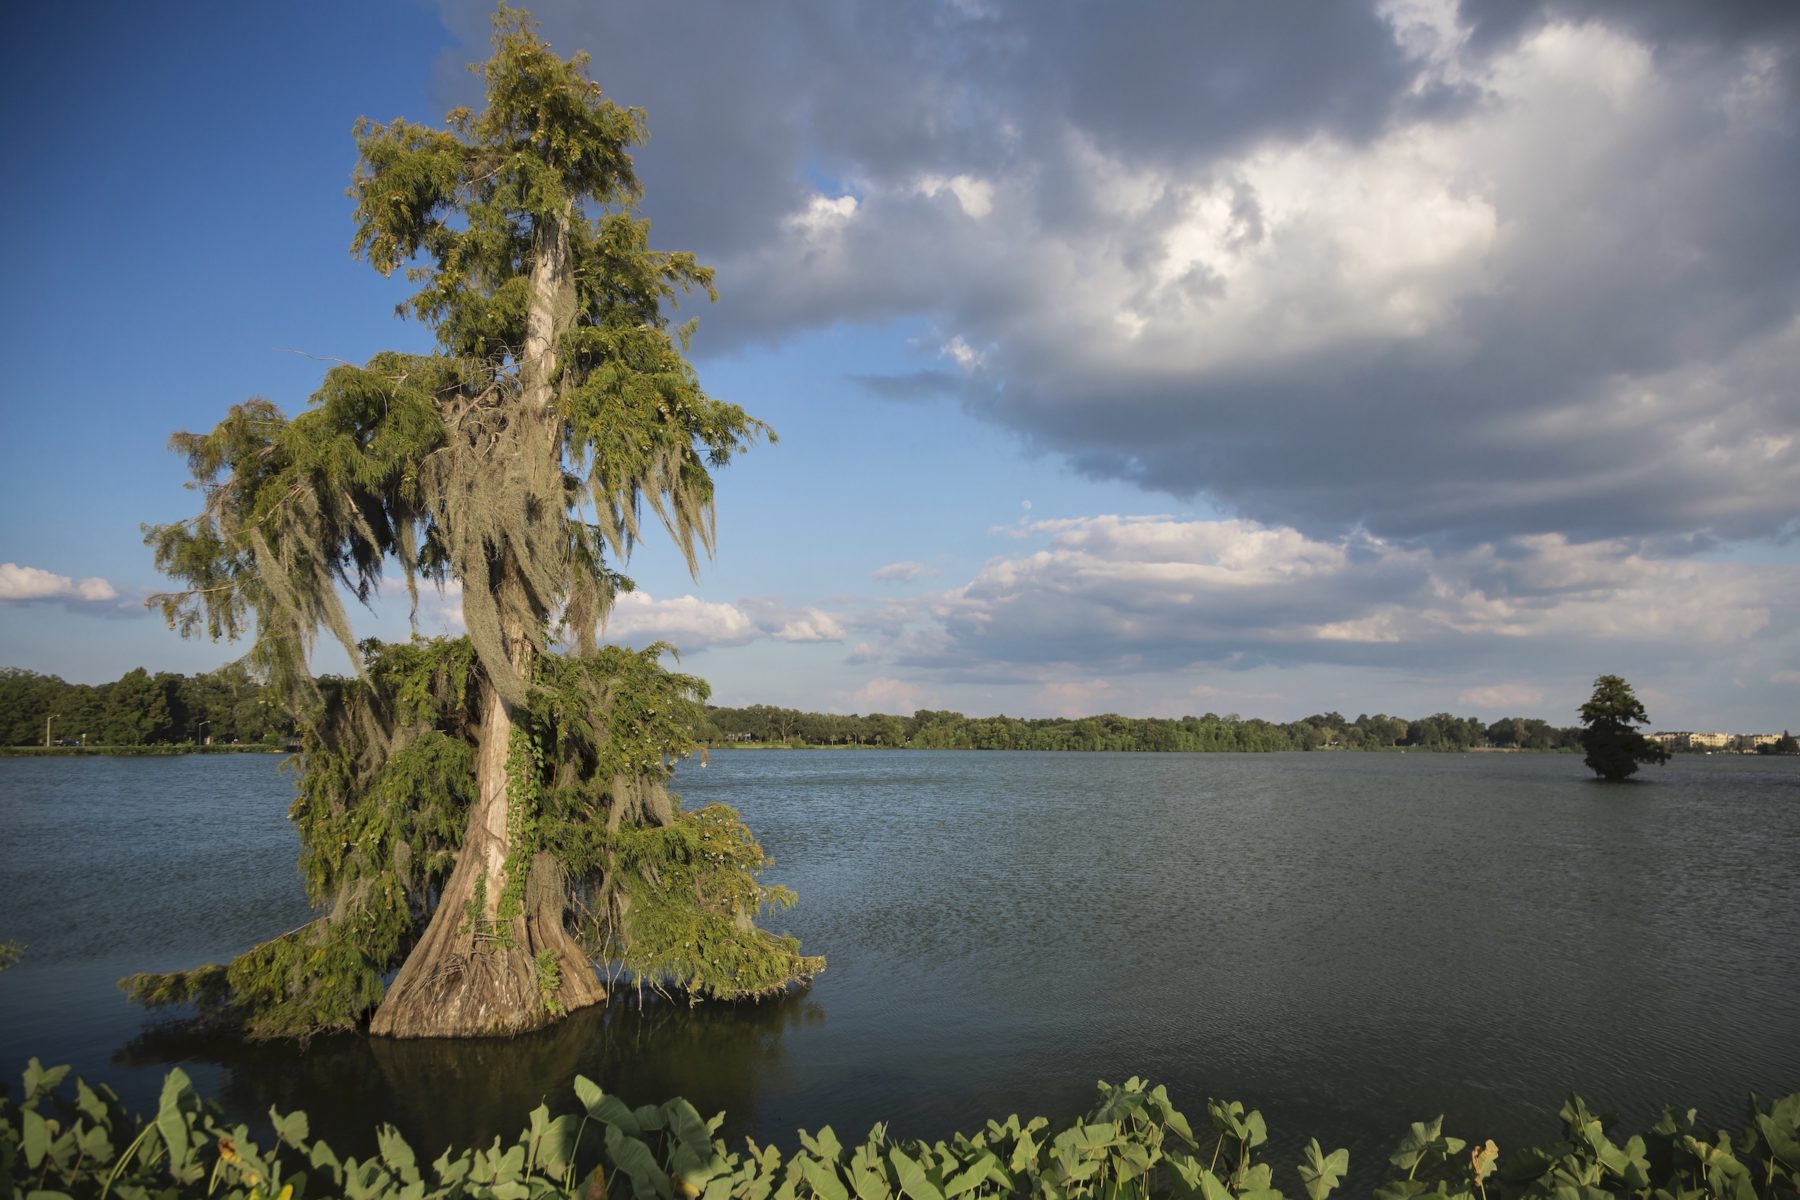 view of tree growing in lake on a cloudy day with blue skies